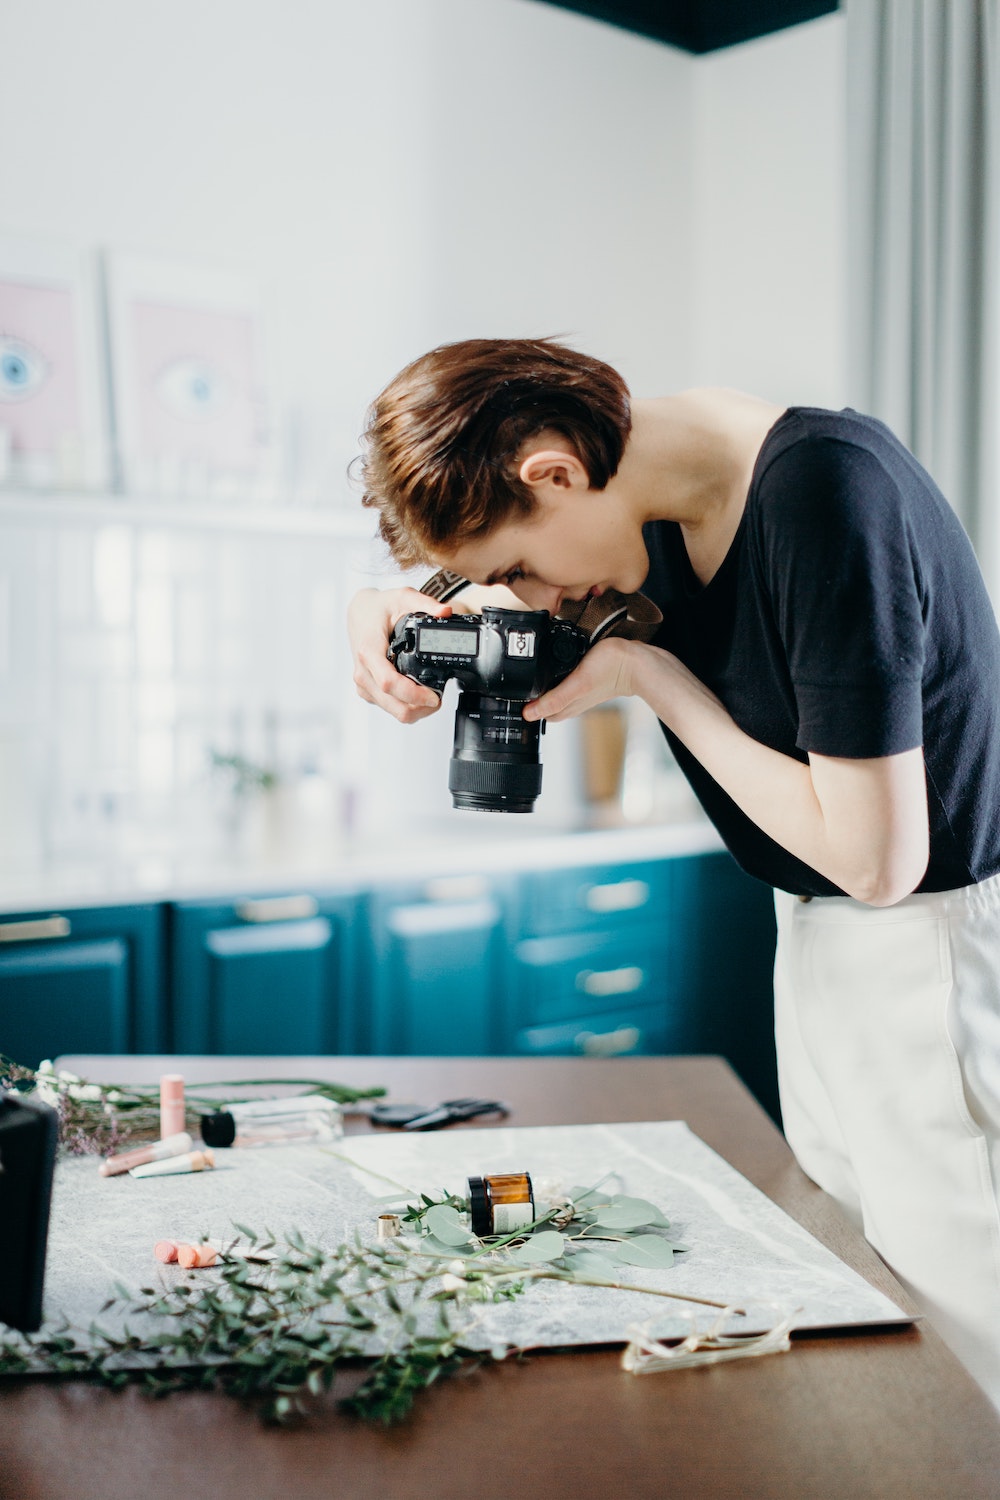 The Do's and Don'ts of Taking Product Pics